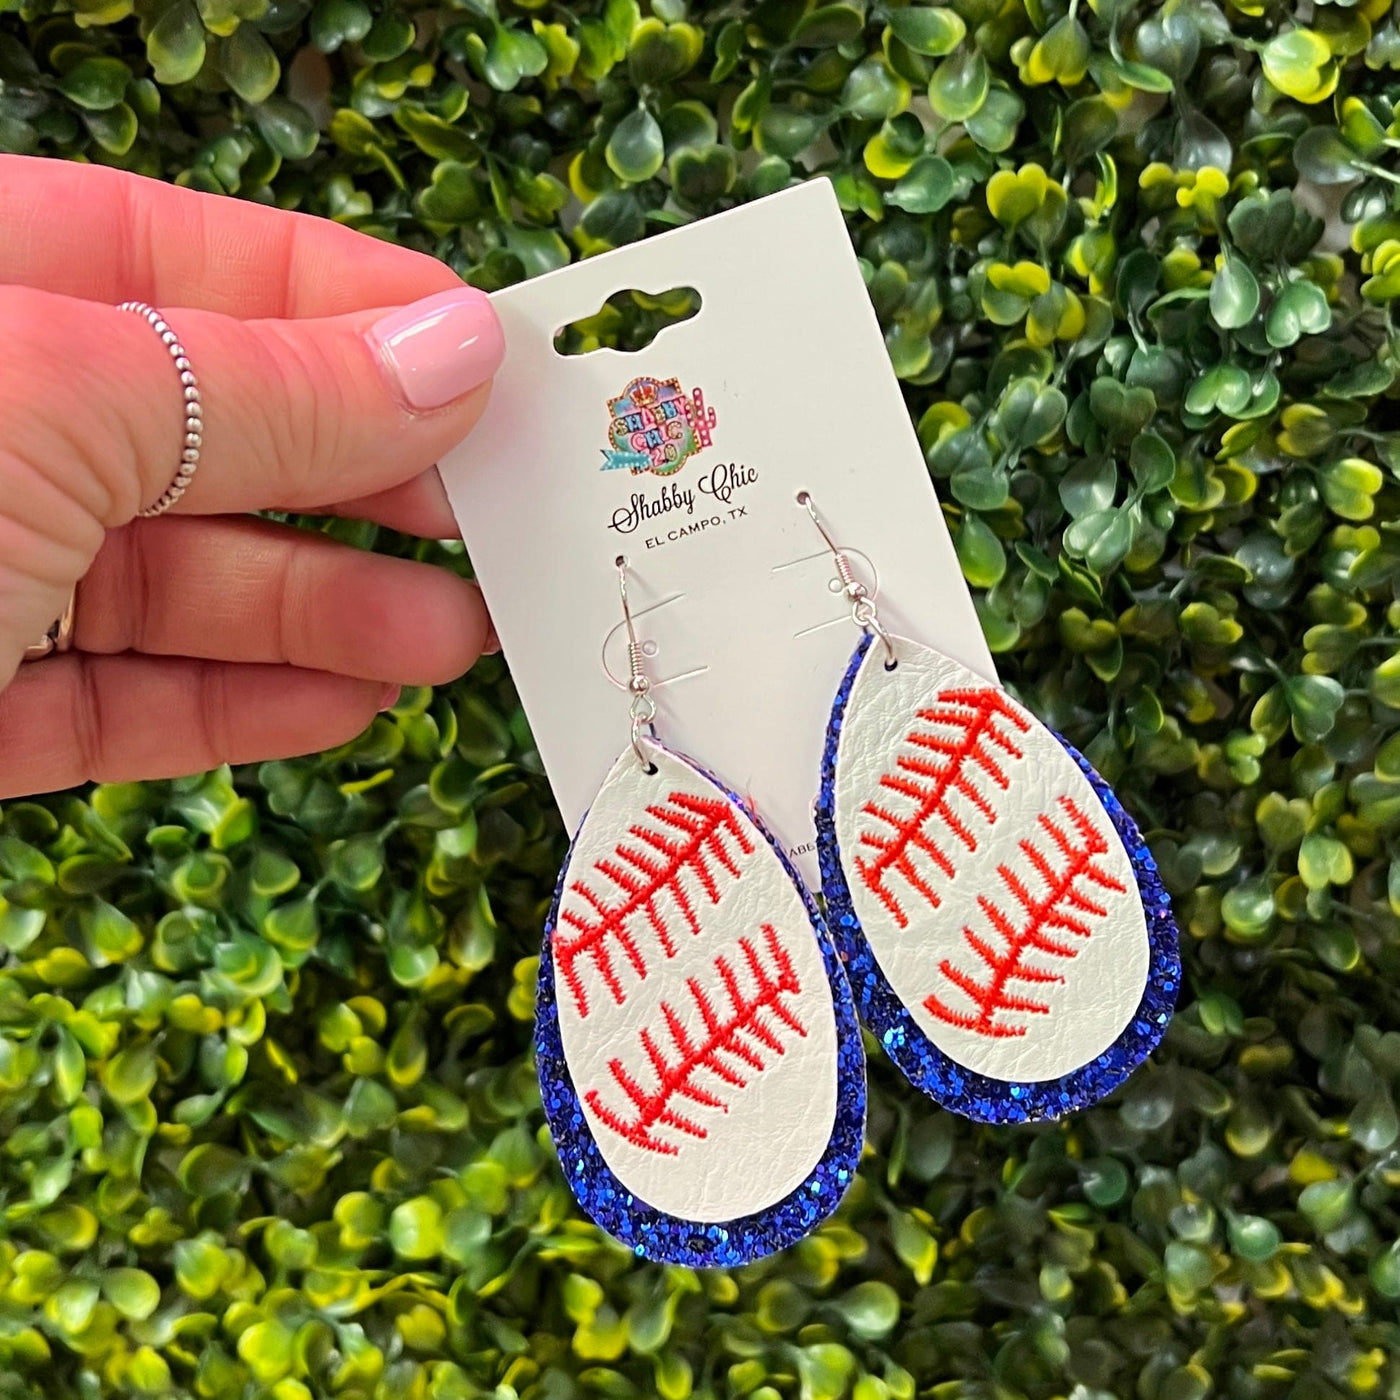 Baseball Earrings with Stitching - Blue Glitter Shabby Chic Boutique and Tanning Salon